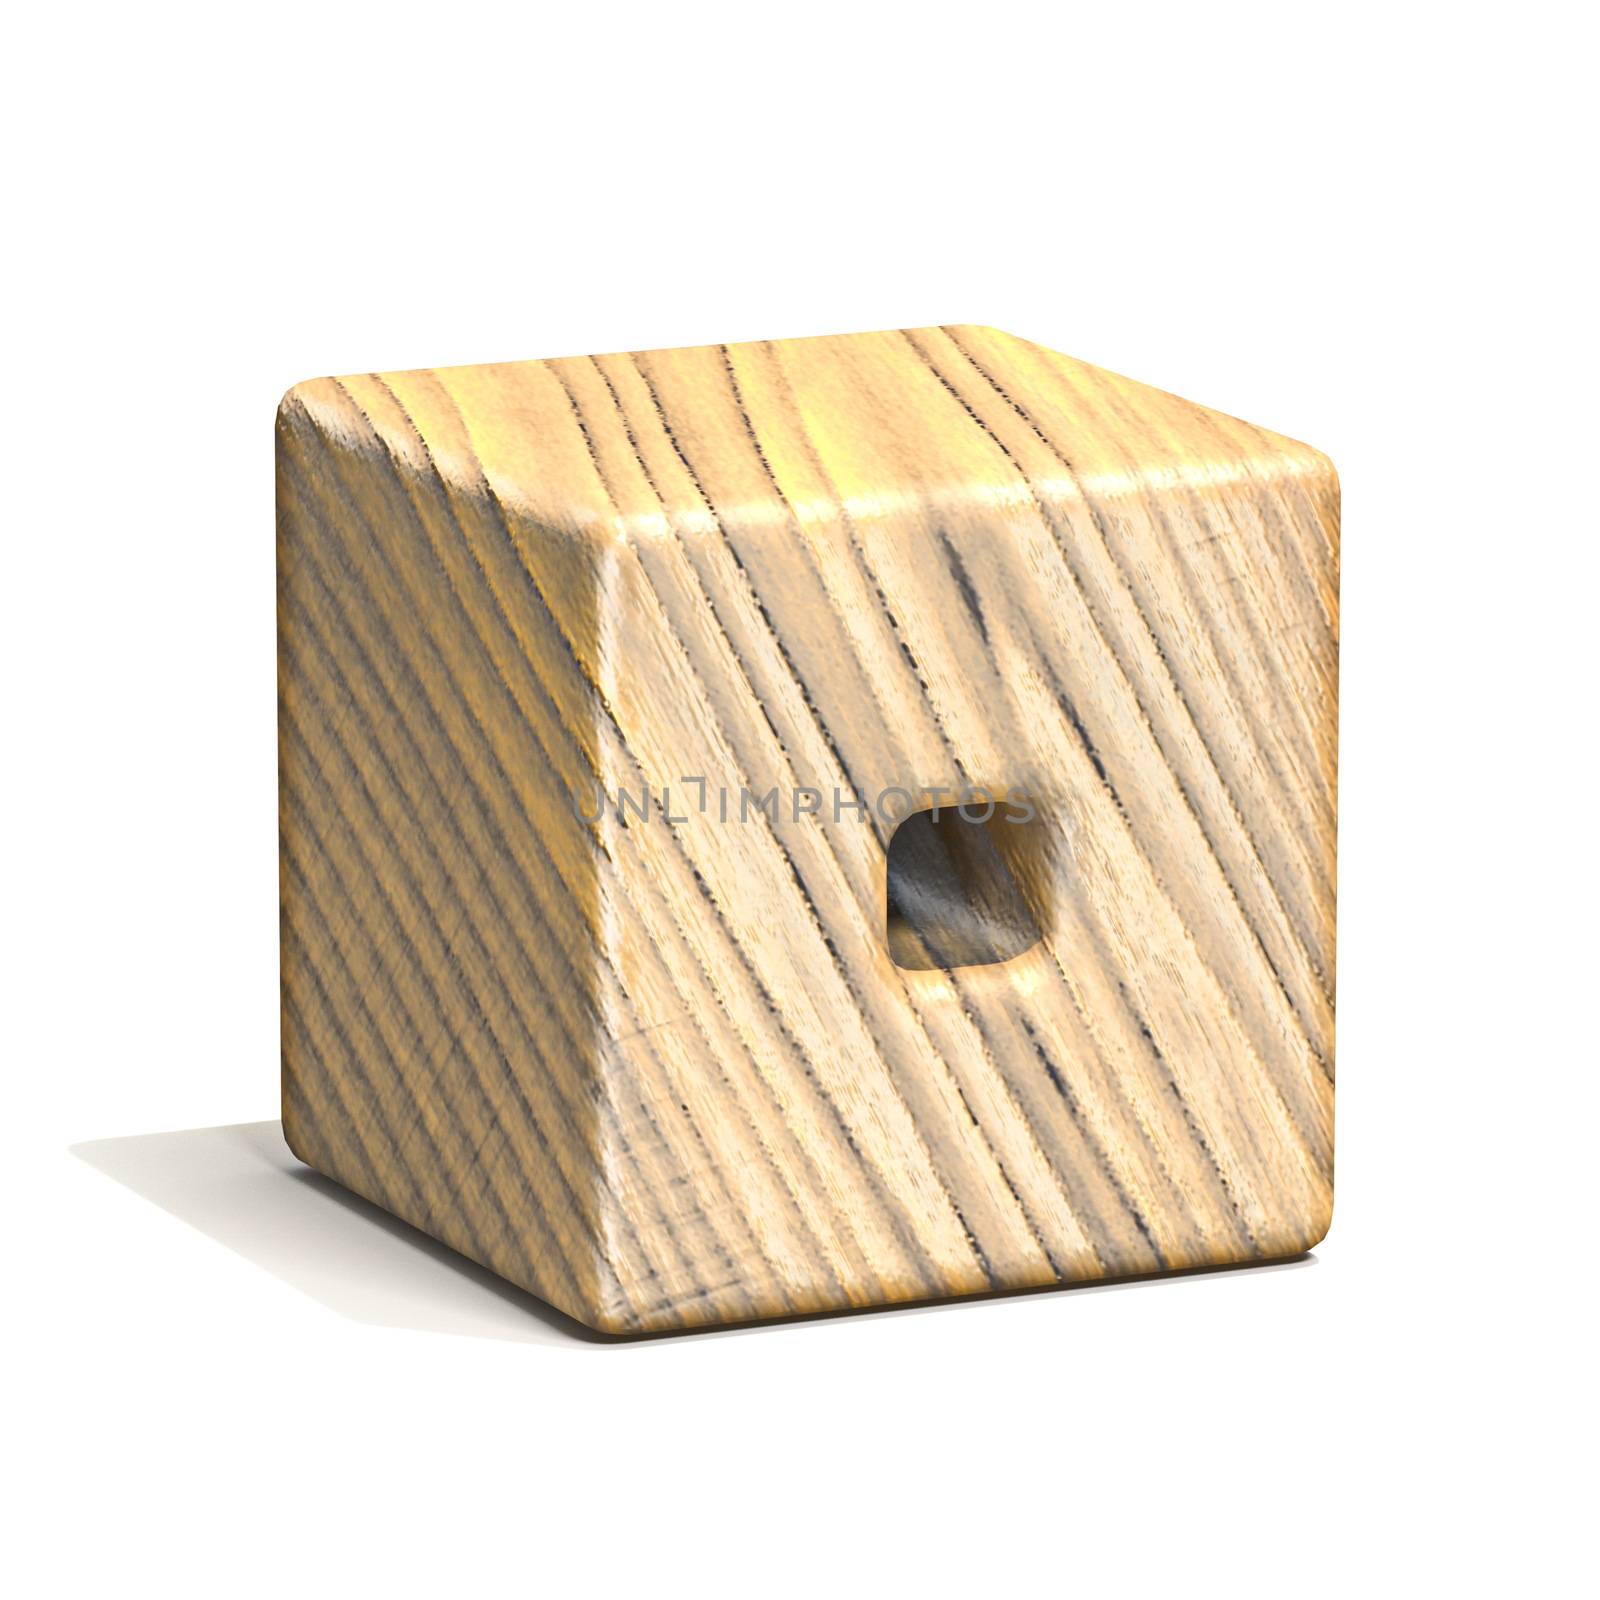 Solid wooden cube font Letter O 3D render illustration isolated on white background